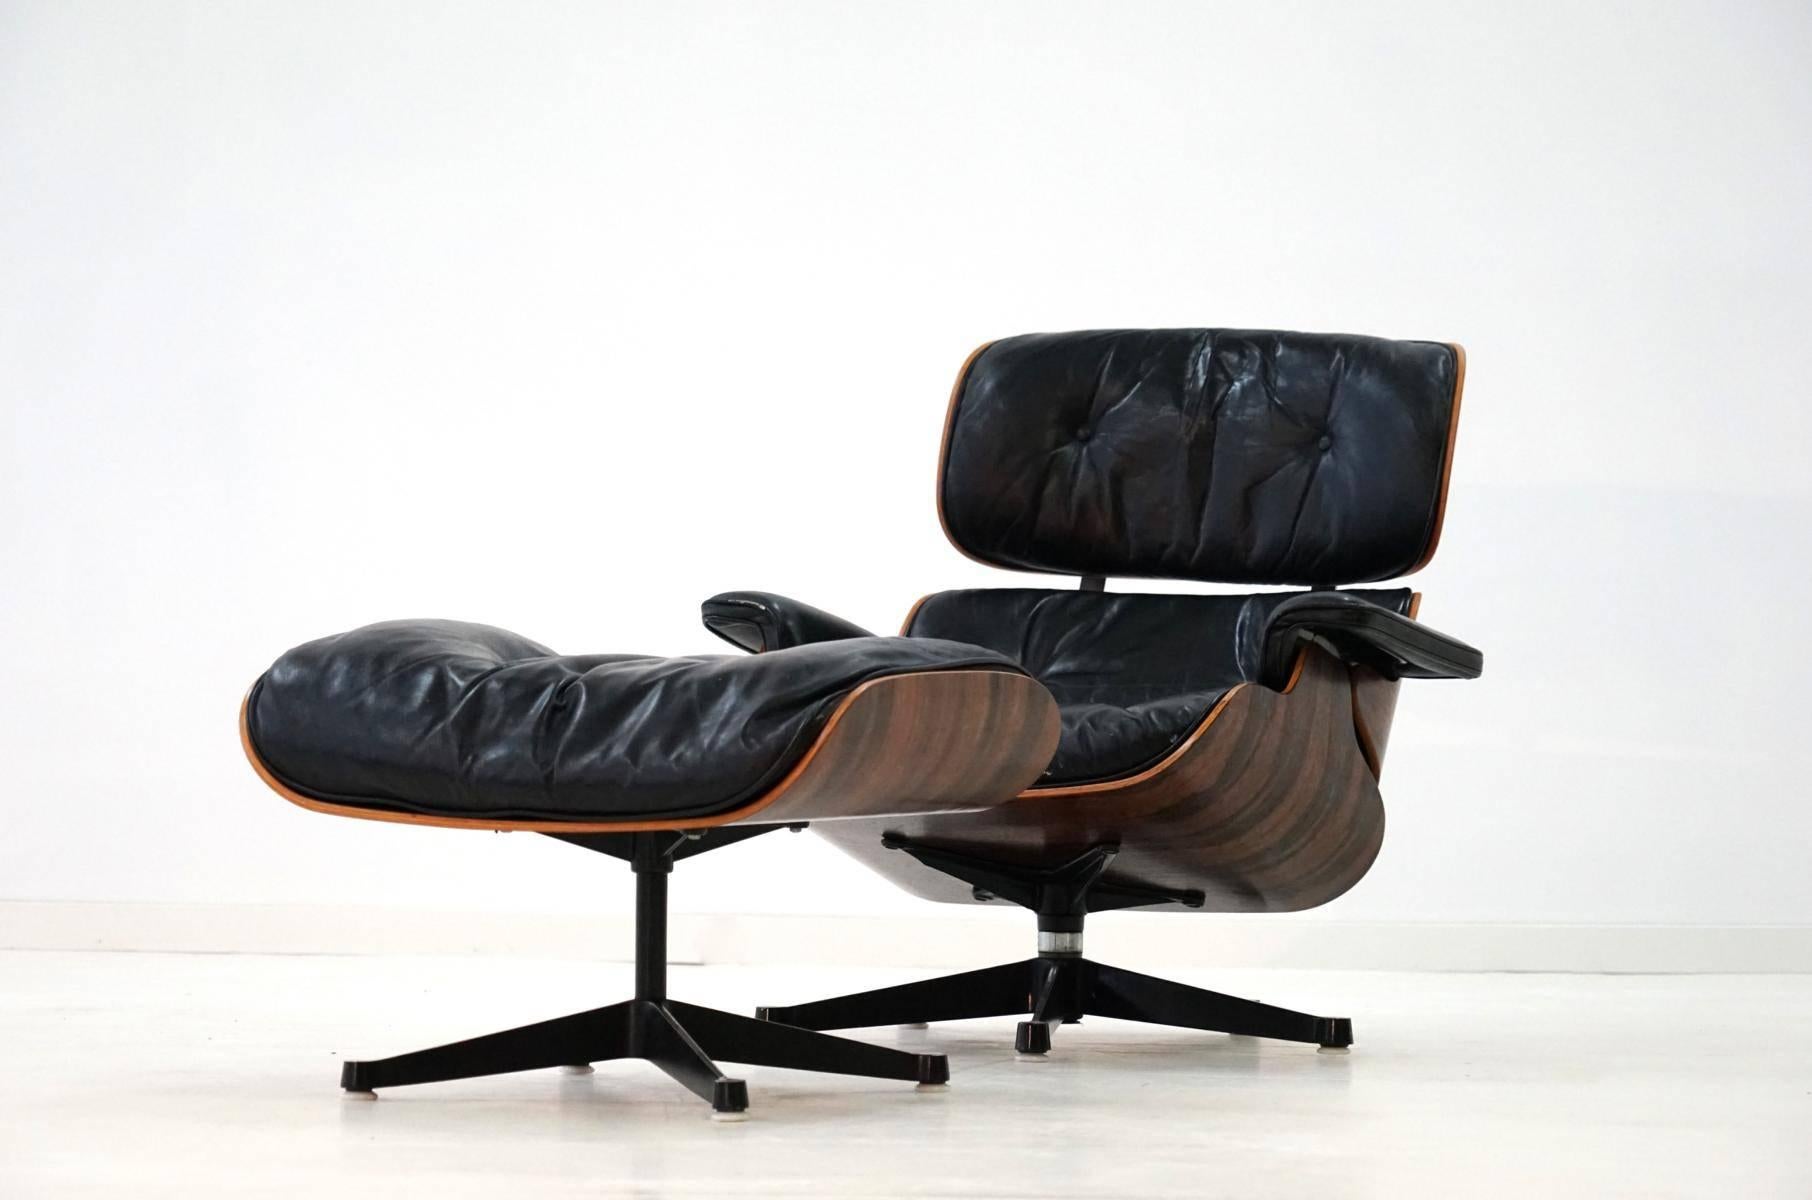 Original Lounge Chair and Ottoman, Charles Eames Herman Miller Rosewood Armchair 2